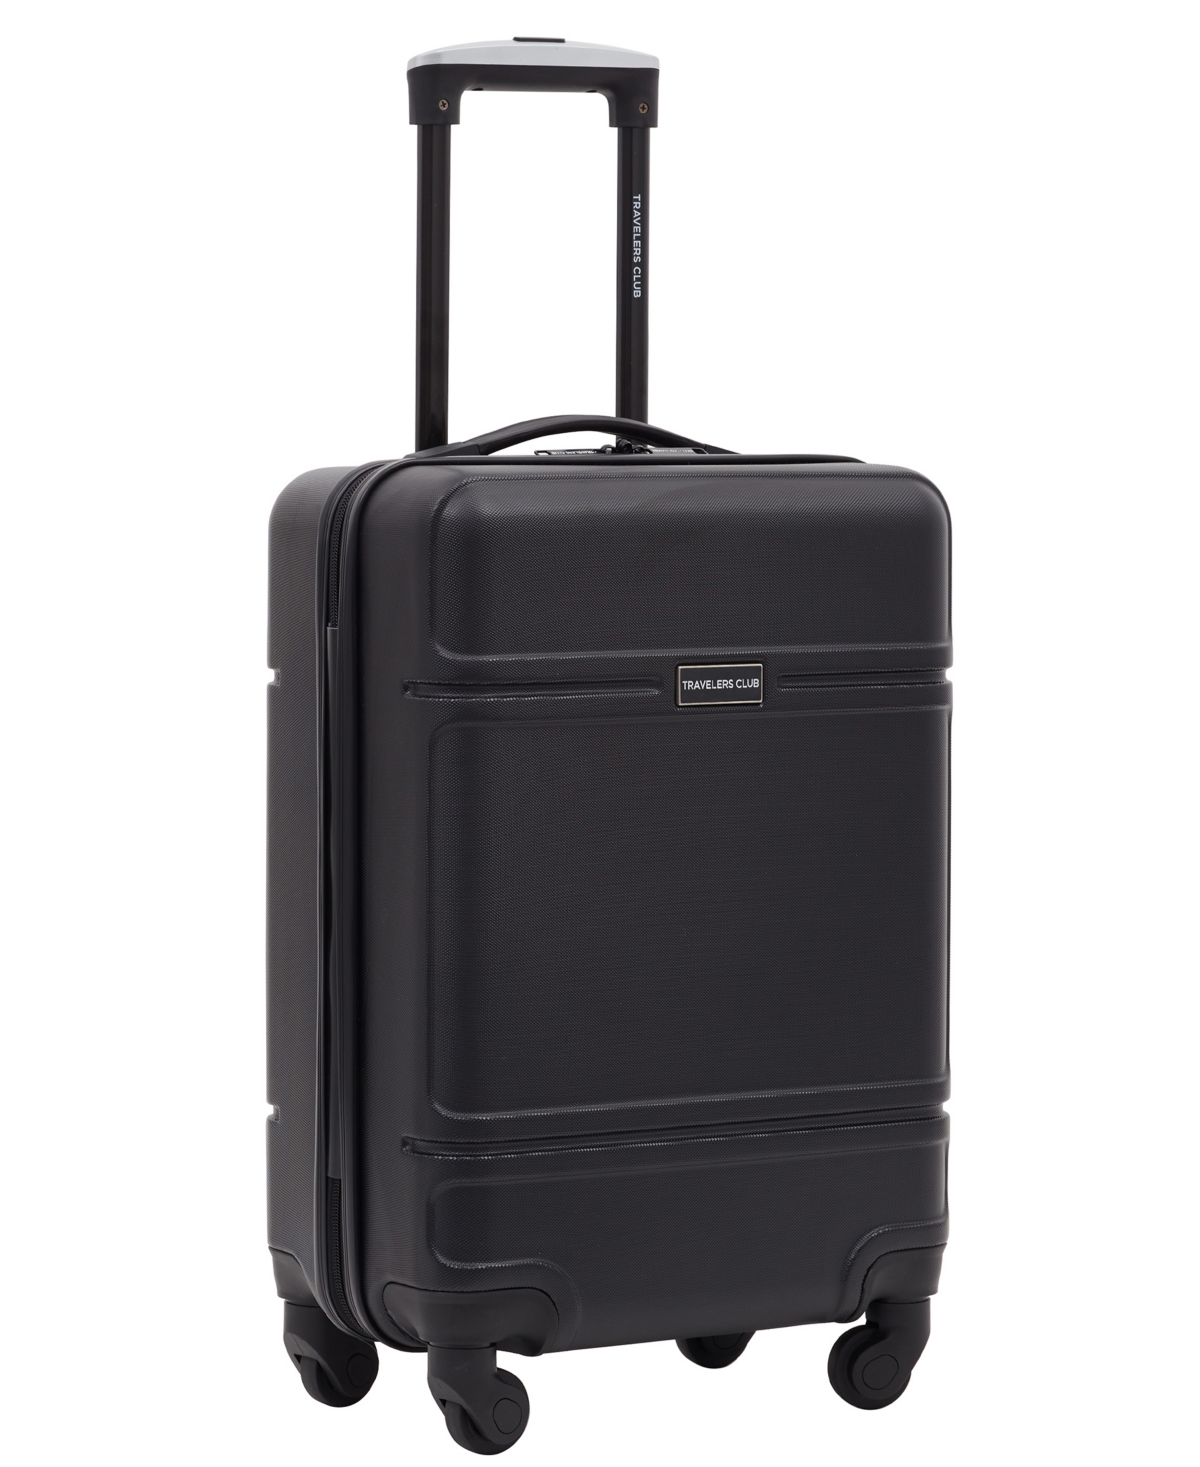 Travelers Club Skyline Collection 20" Rolling Carry-on With 360 Degree 4-wheel System In Black